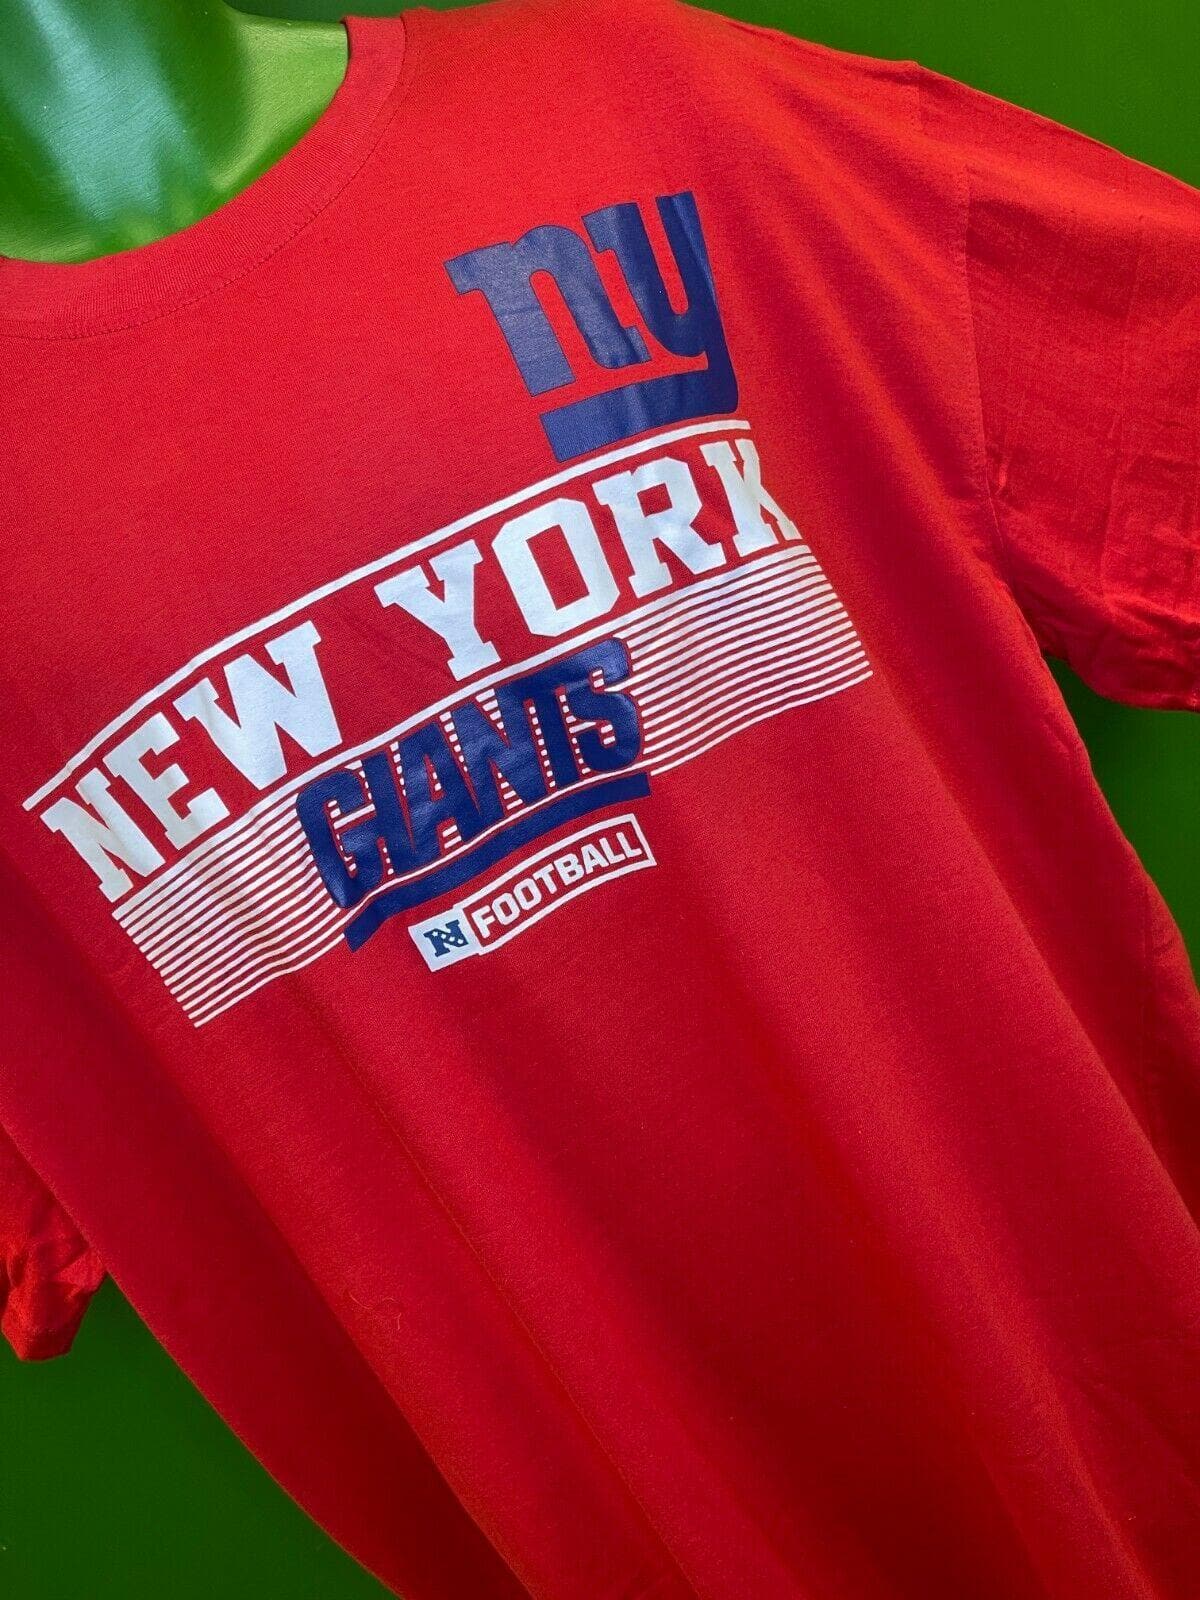 NFL New York Giants Majestic Red Cotton T-Shirt Men's 4X-Large NWT